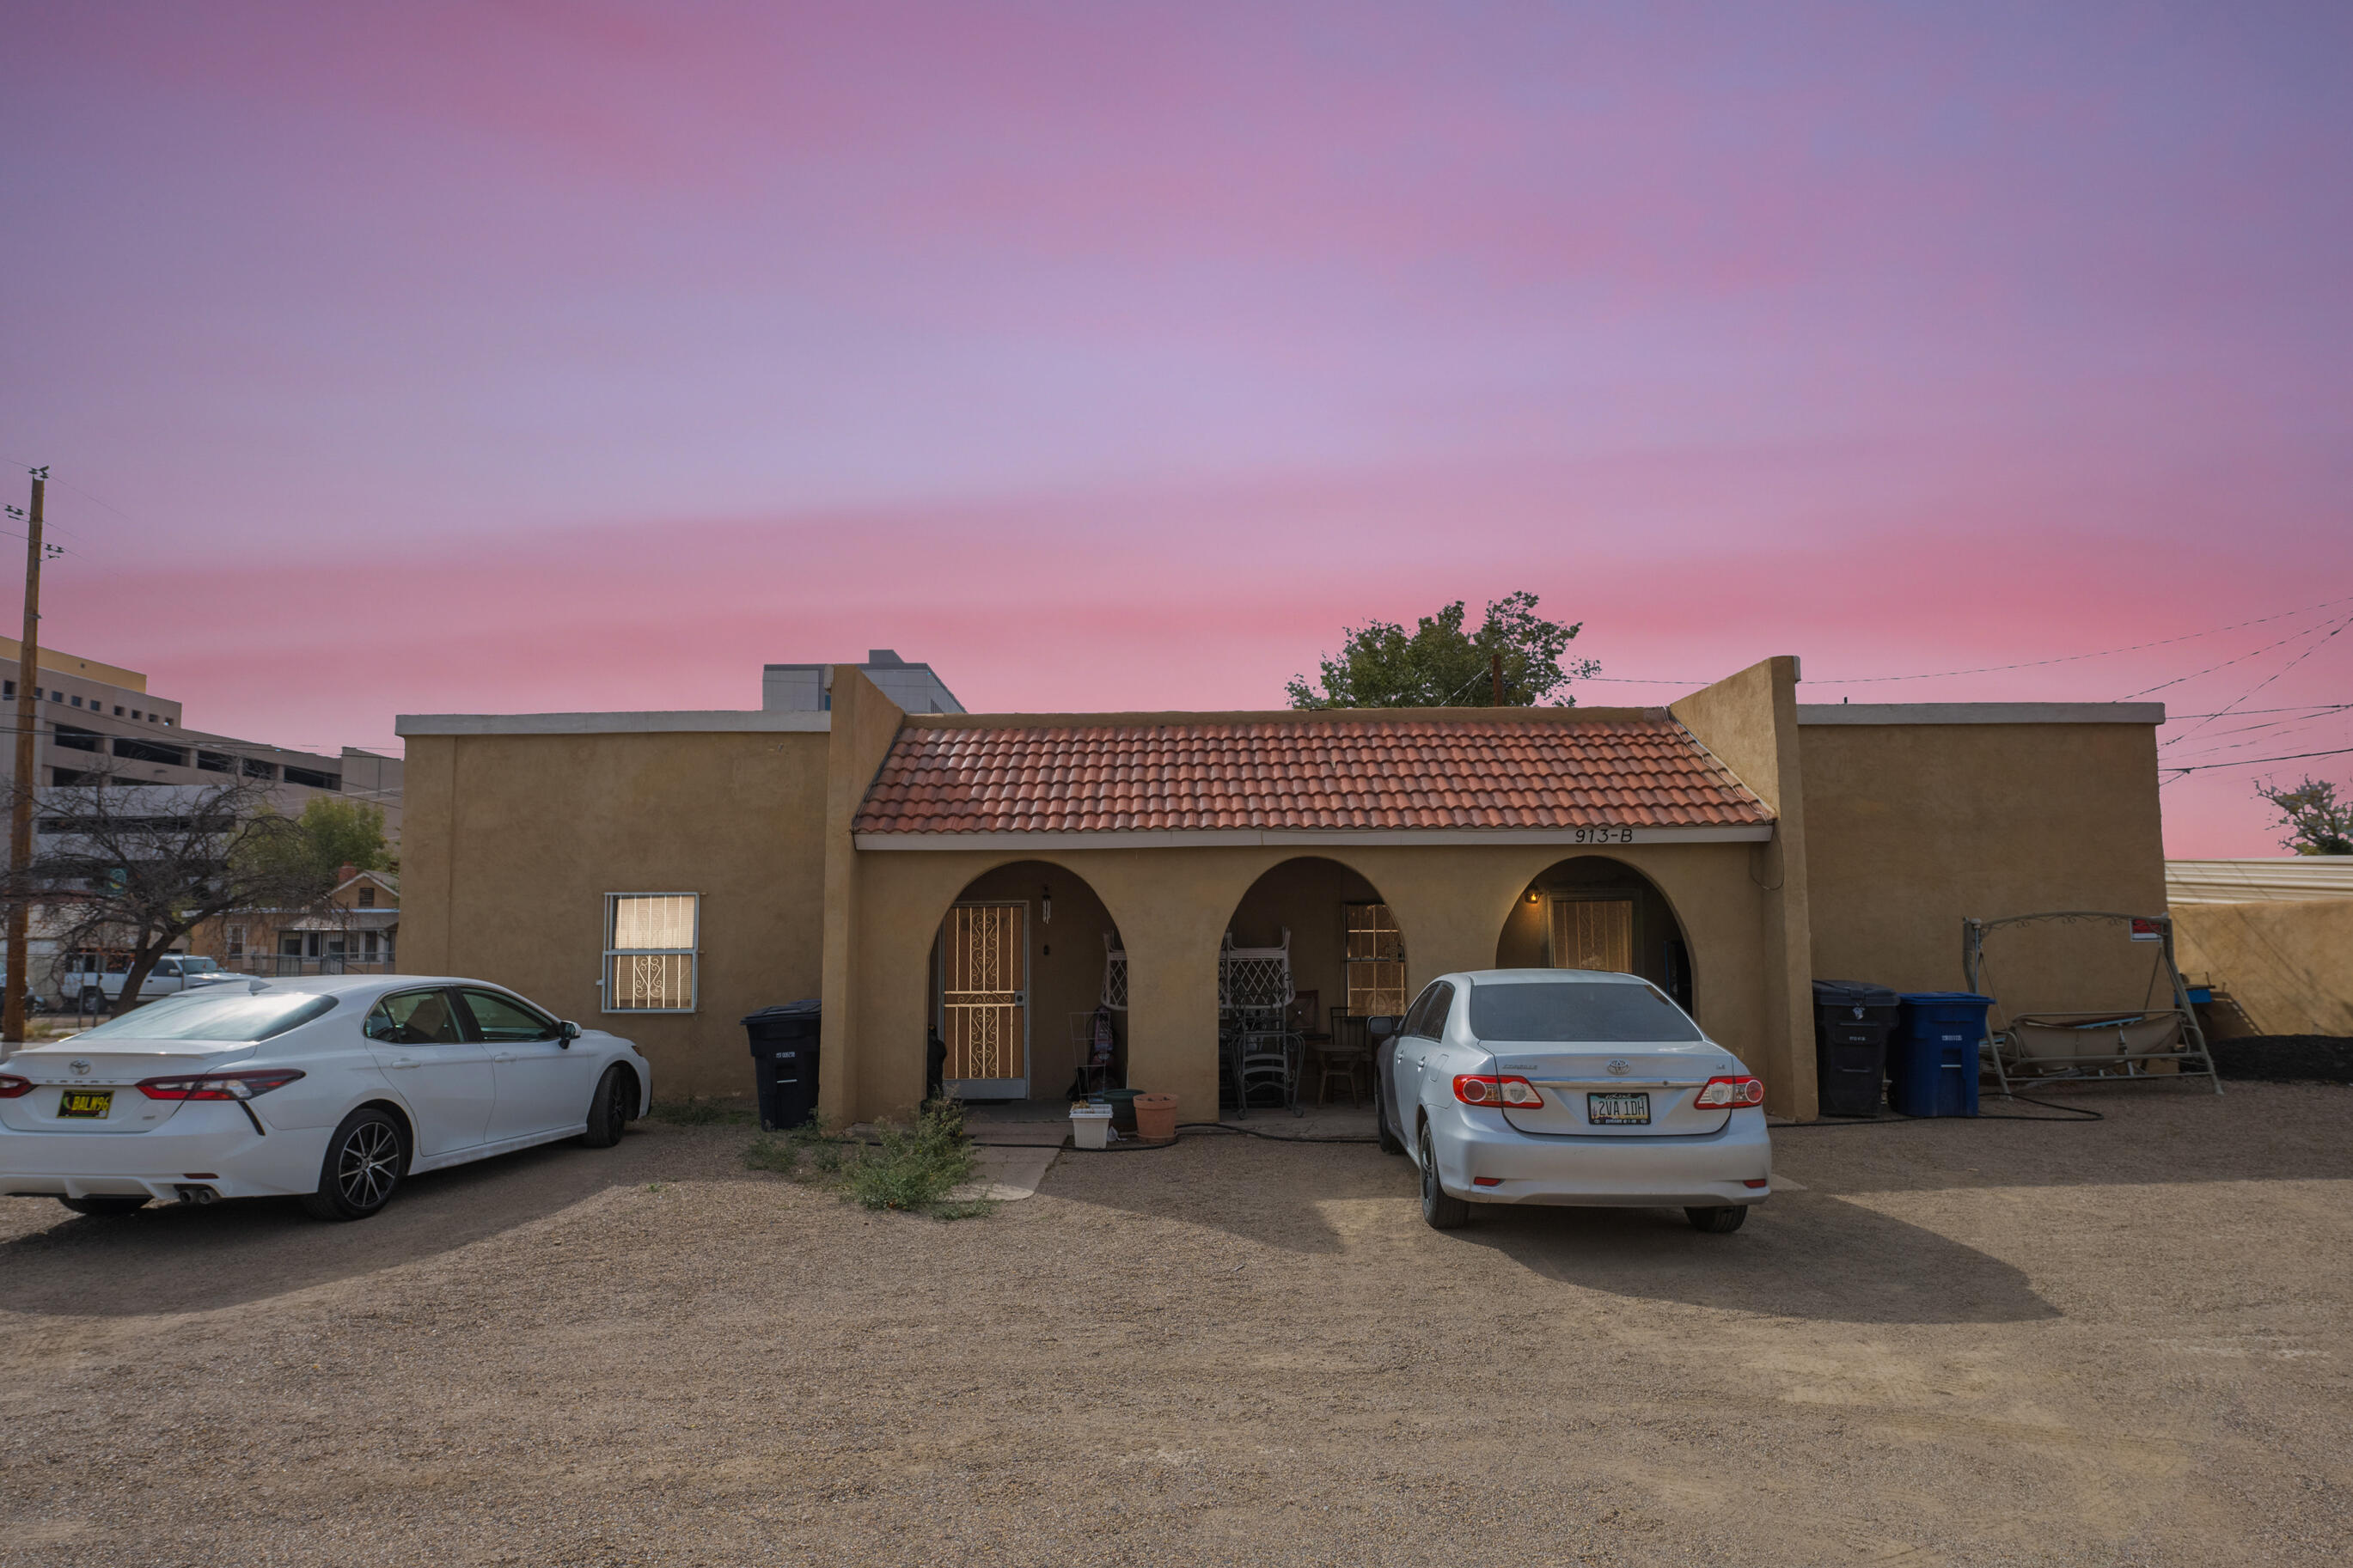 913 5th Street NW, Albuquerque, New Mexico 87102, 2 Bedrooms Bedrooms, ,1 BathroomBathrooms,Residential Income,For Sale,913 5th Street NW,1044070